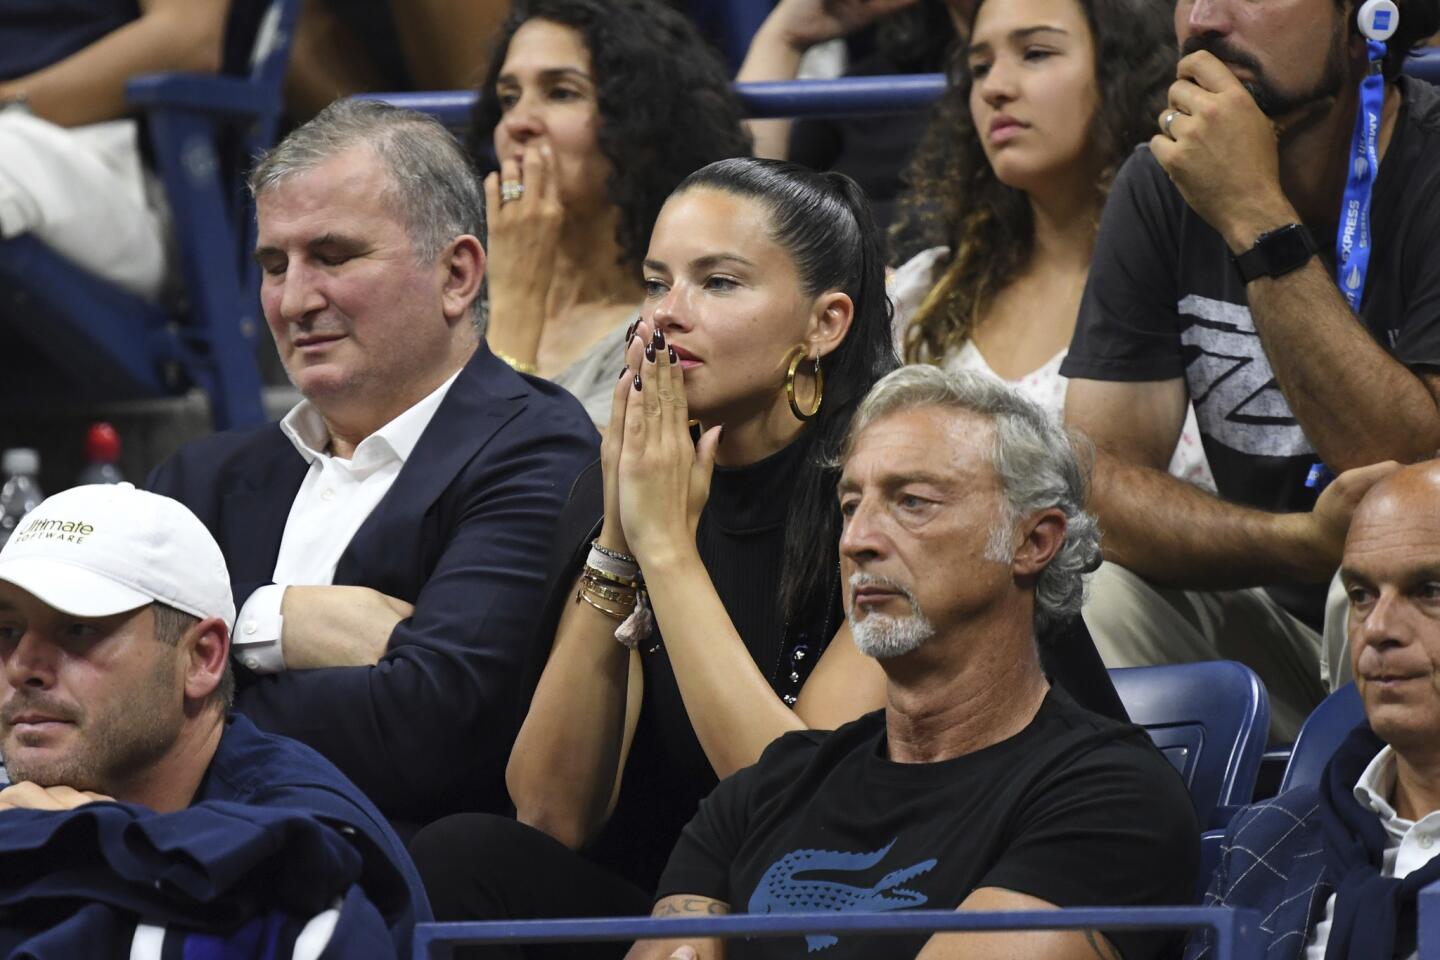 Model Adriana Lima looks tense while watching Madison Keys vs. Sofia Kenin at the 2019 U.S. Open on Arthur Ashe Stadium at the USTA Billie Jean King National Tennis Center on Aug. 30, 2019 in Flushing, Queens.